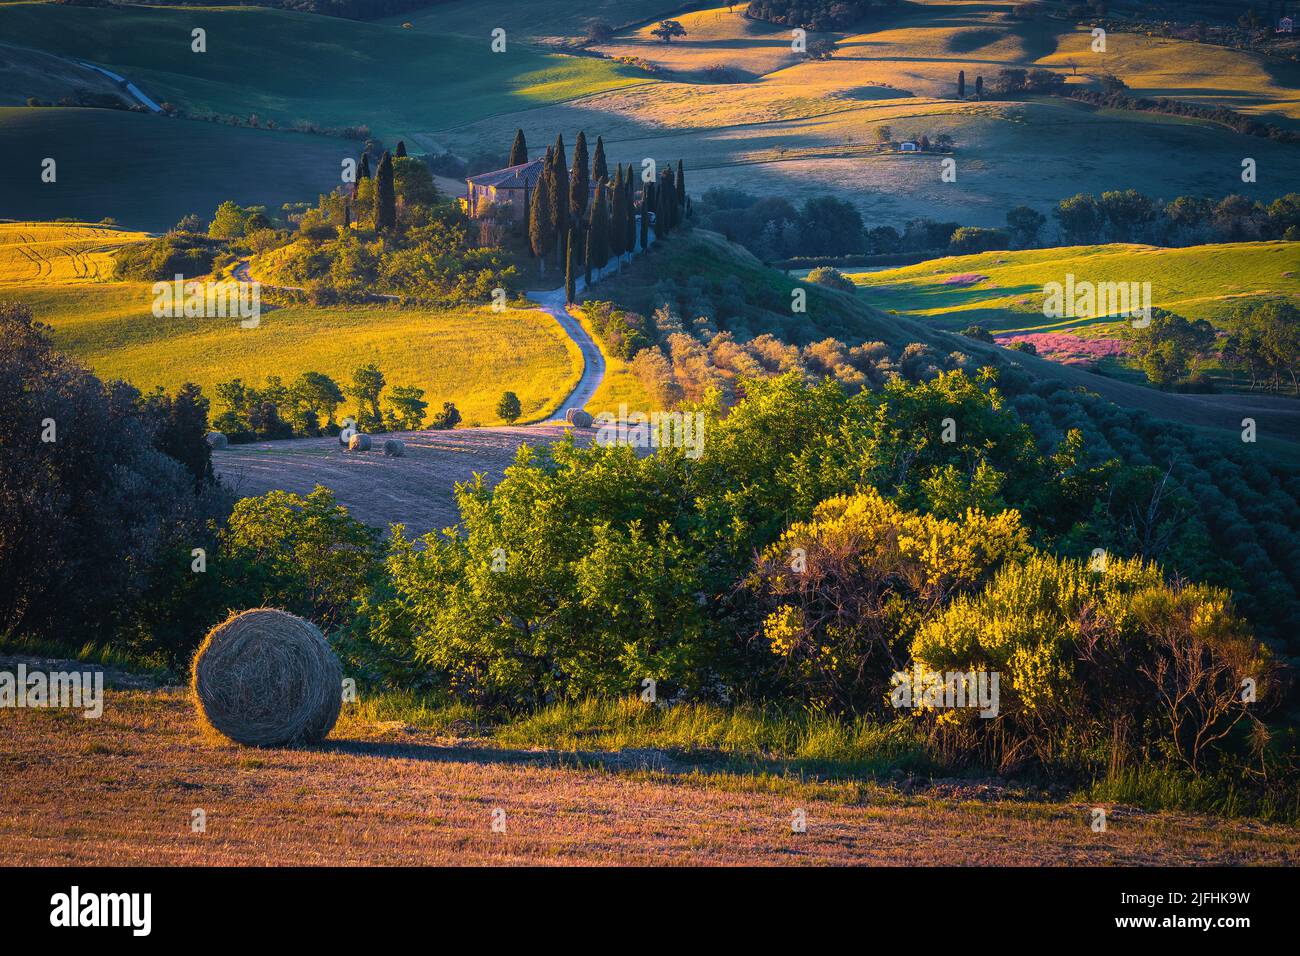 Stunning rural dawn scenery with hay bale on the slope. Olive plantation and countryside landscape at sunrise in Tuscany, Italy, Europe Stock Photo